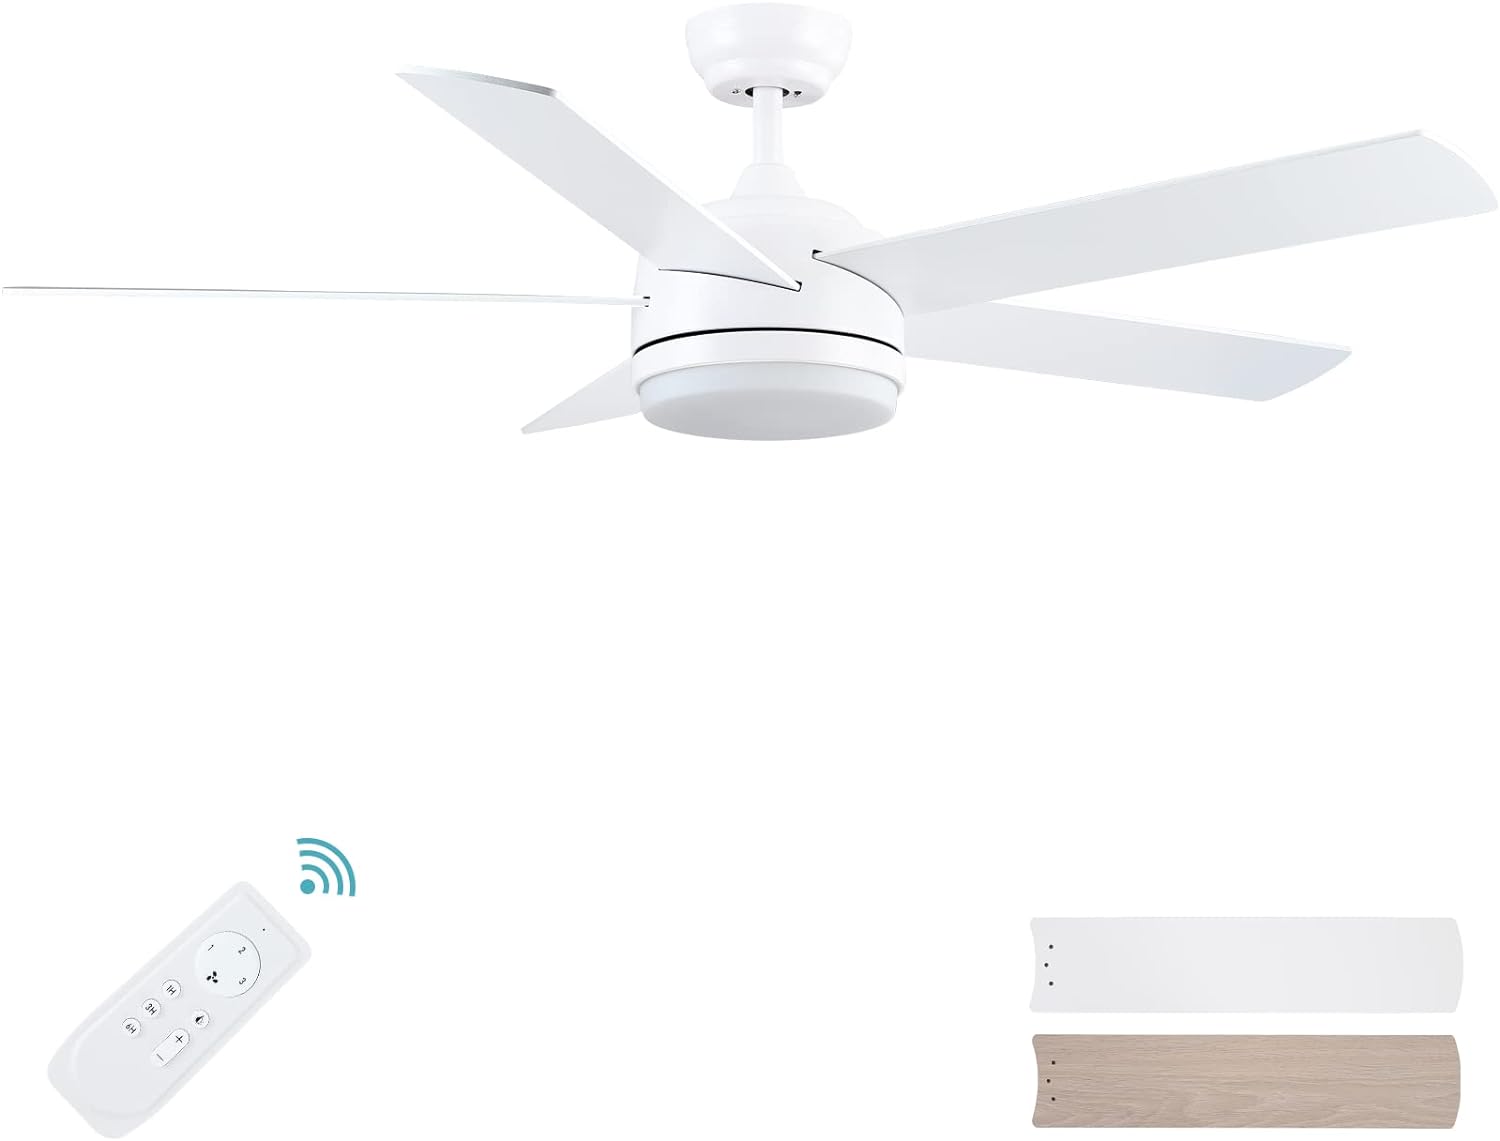 Good fan that matches our room style and works well. The color temperature options of the but in LED light is a nice feature. Also nice to have a remote control on the nightstand to adjust the speed of the blades if needed.